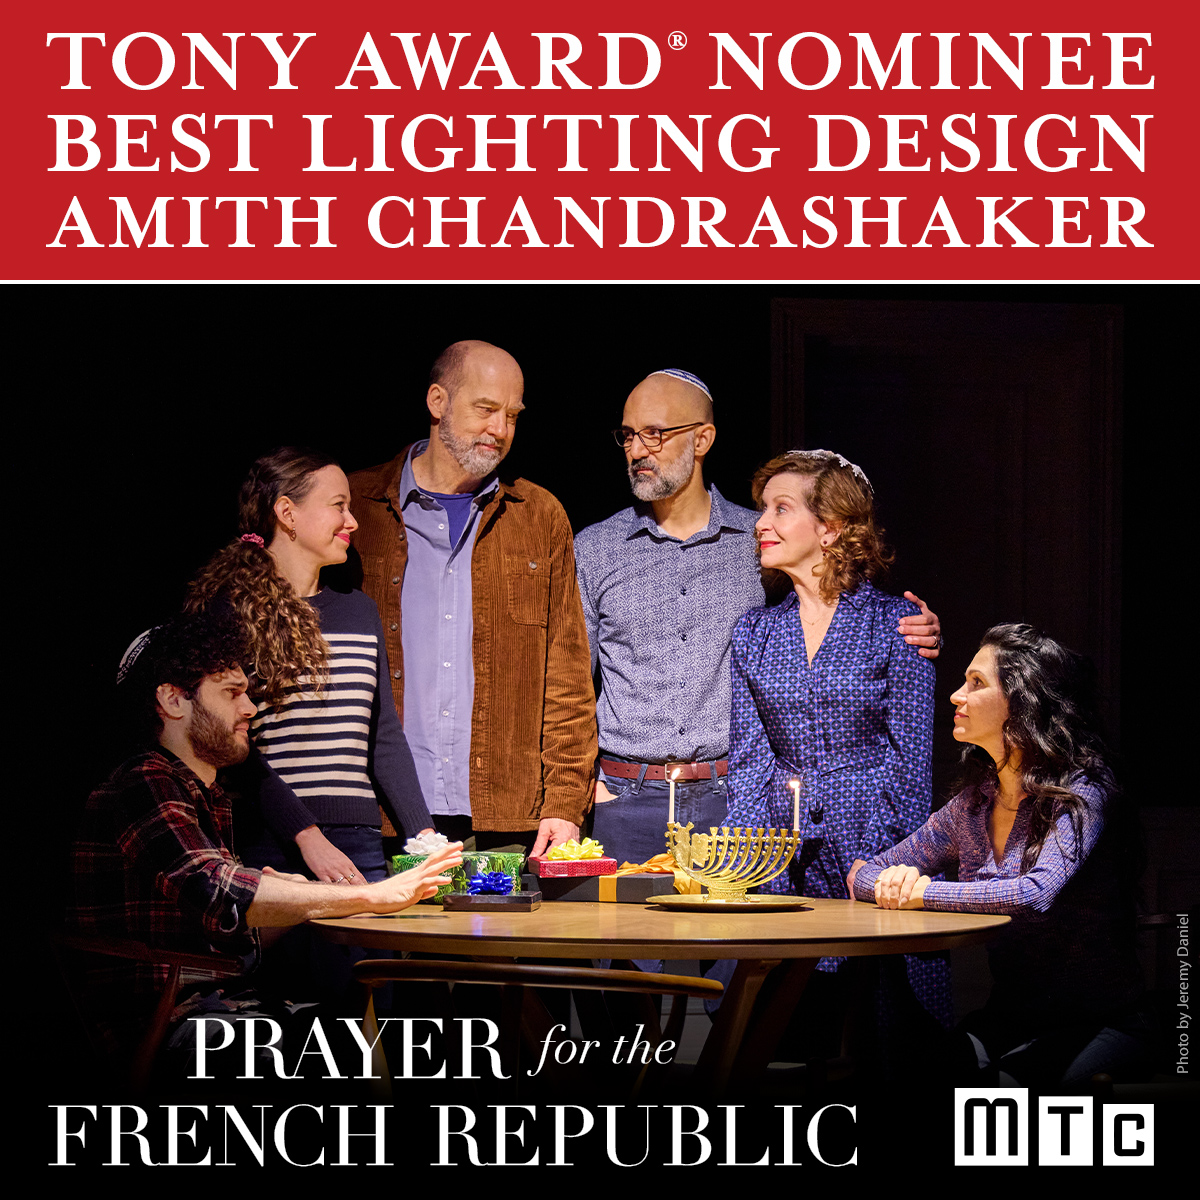 Prayer for the French Republic is a 2024 Tony Award nominee! ❤️ Winner of the 2022 Drama Desk and Outer Critics Circle Awards for Best New Off-Broadway Play, this epic production told the story of one French family, seven decades apart. Congratulations to the entire team!